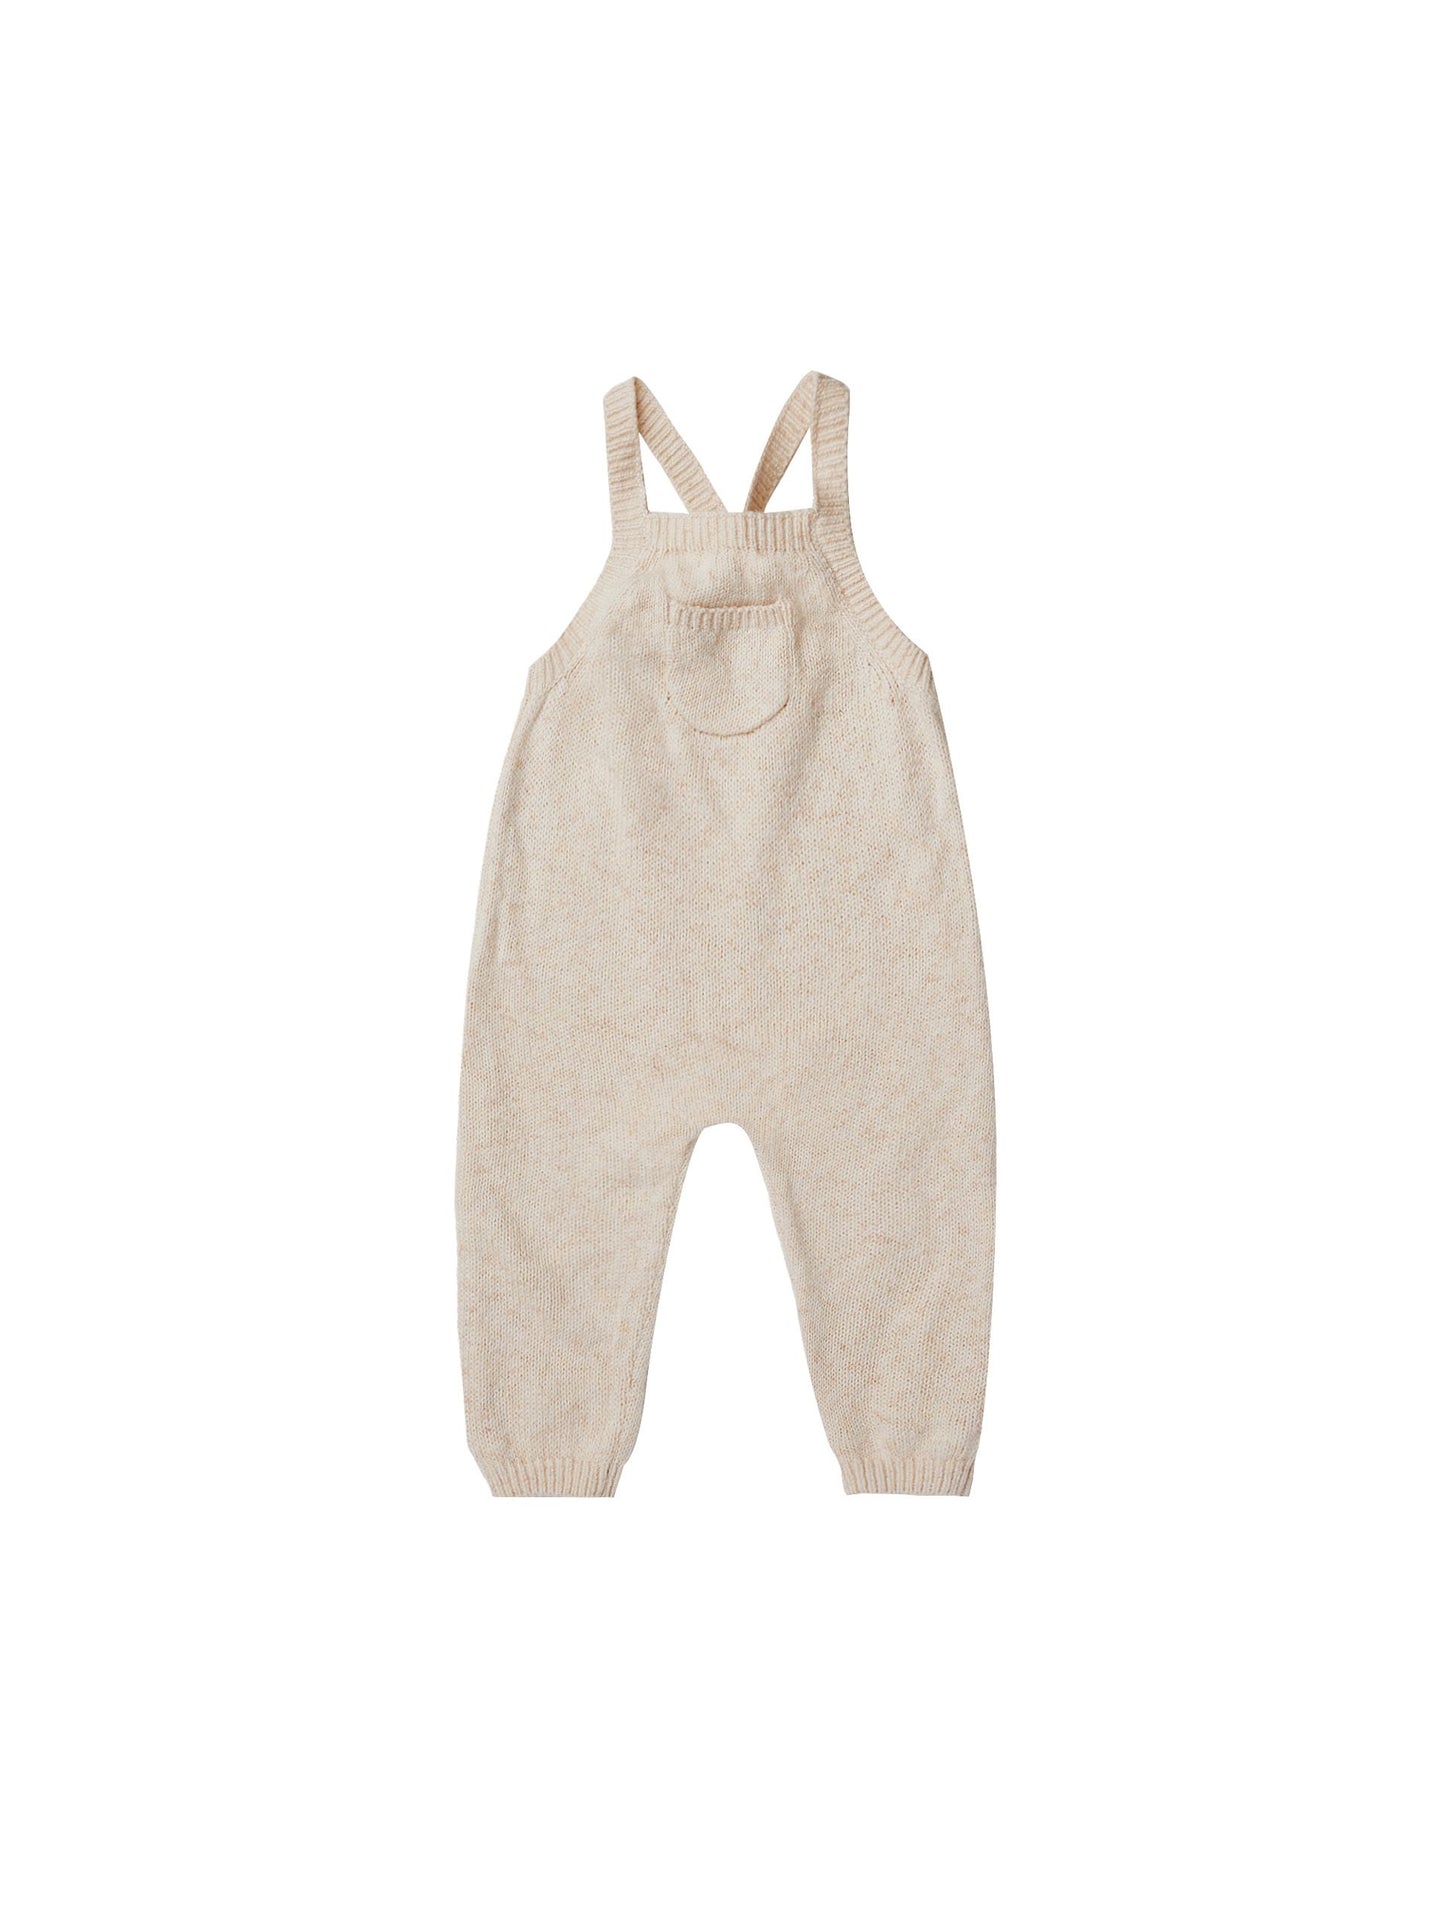 Quincy Mae - Knit Overall (Natural Heather)